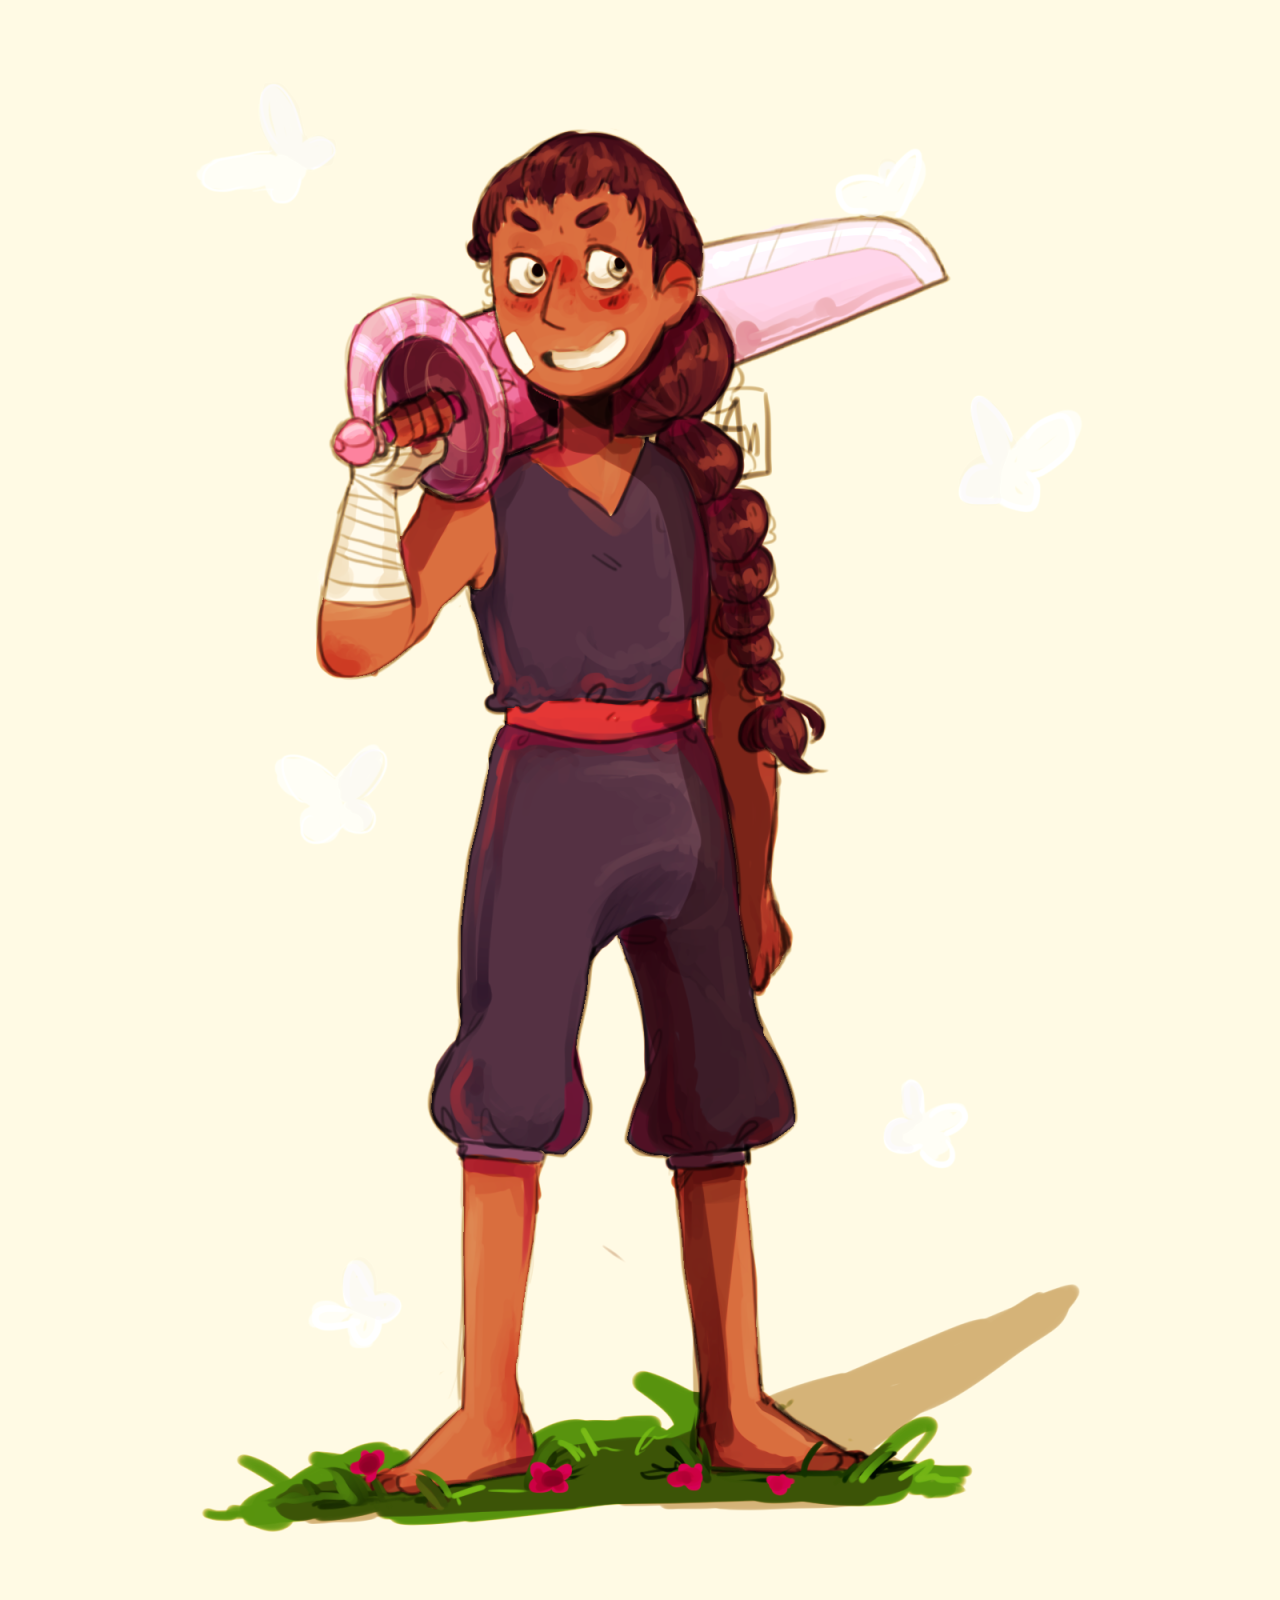 Anonymous said: your taking requests, right? um maybe Connie from SU with rose's sword? Answer: There she is